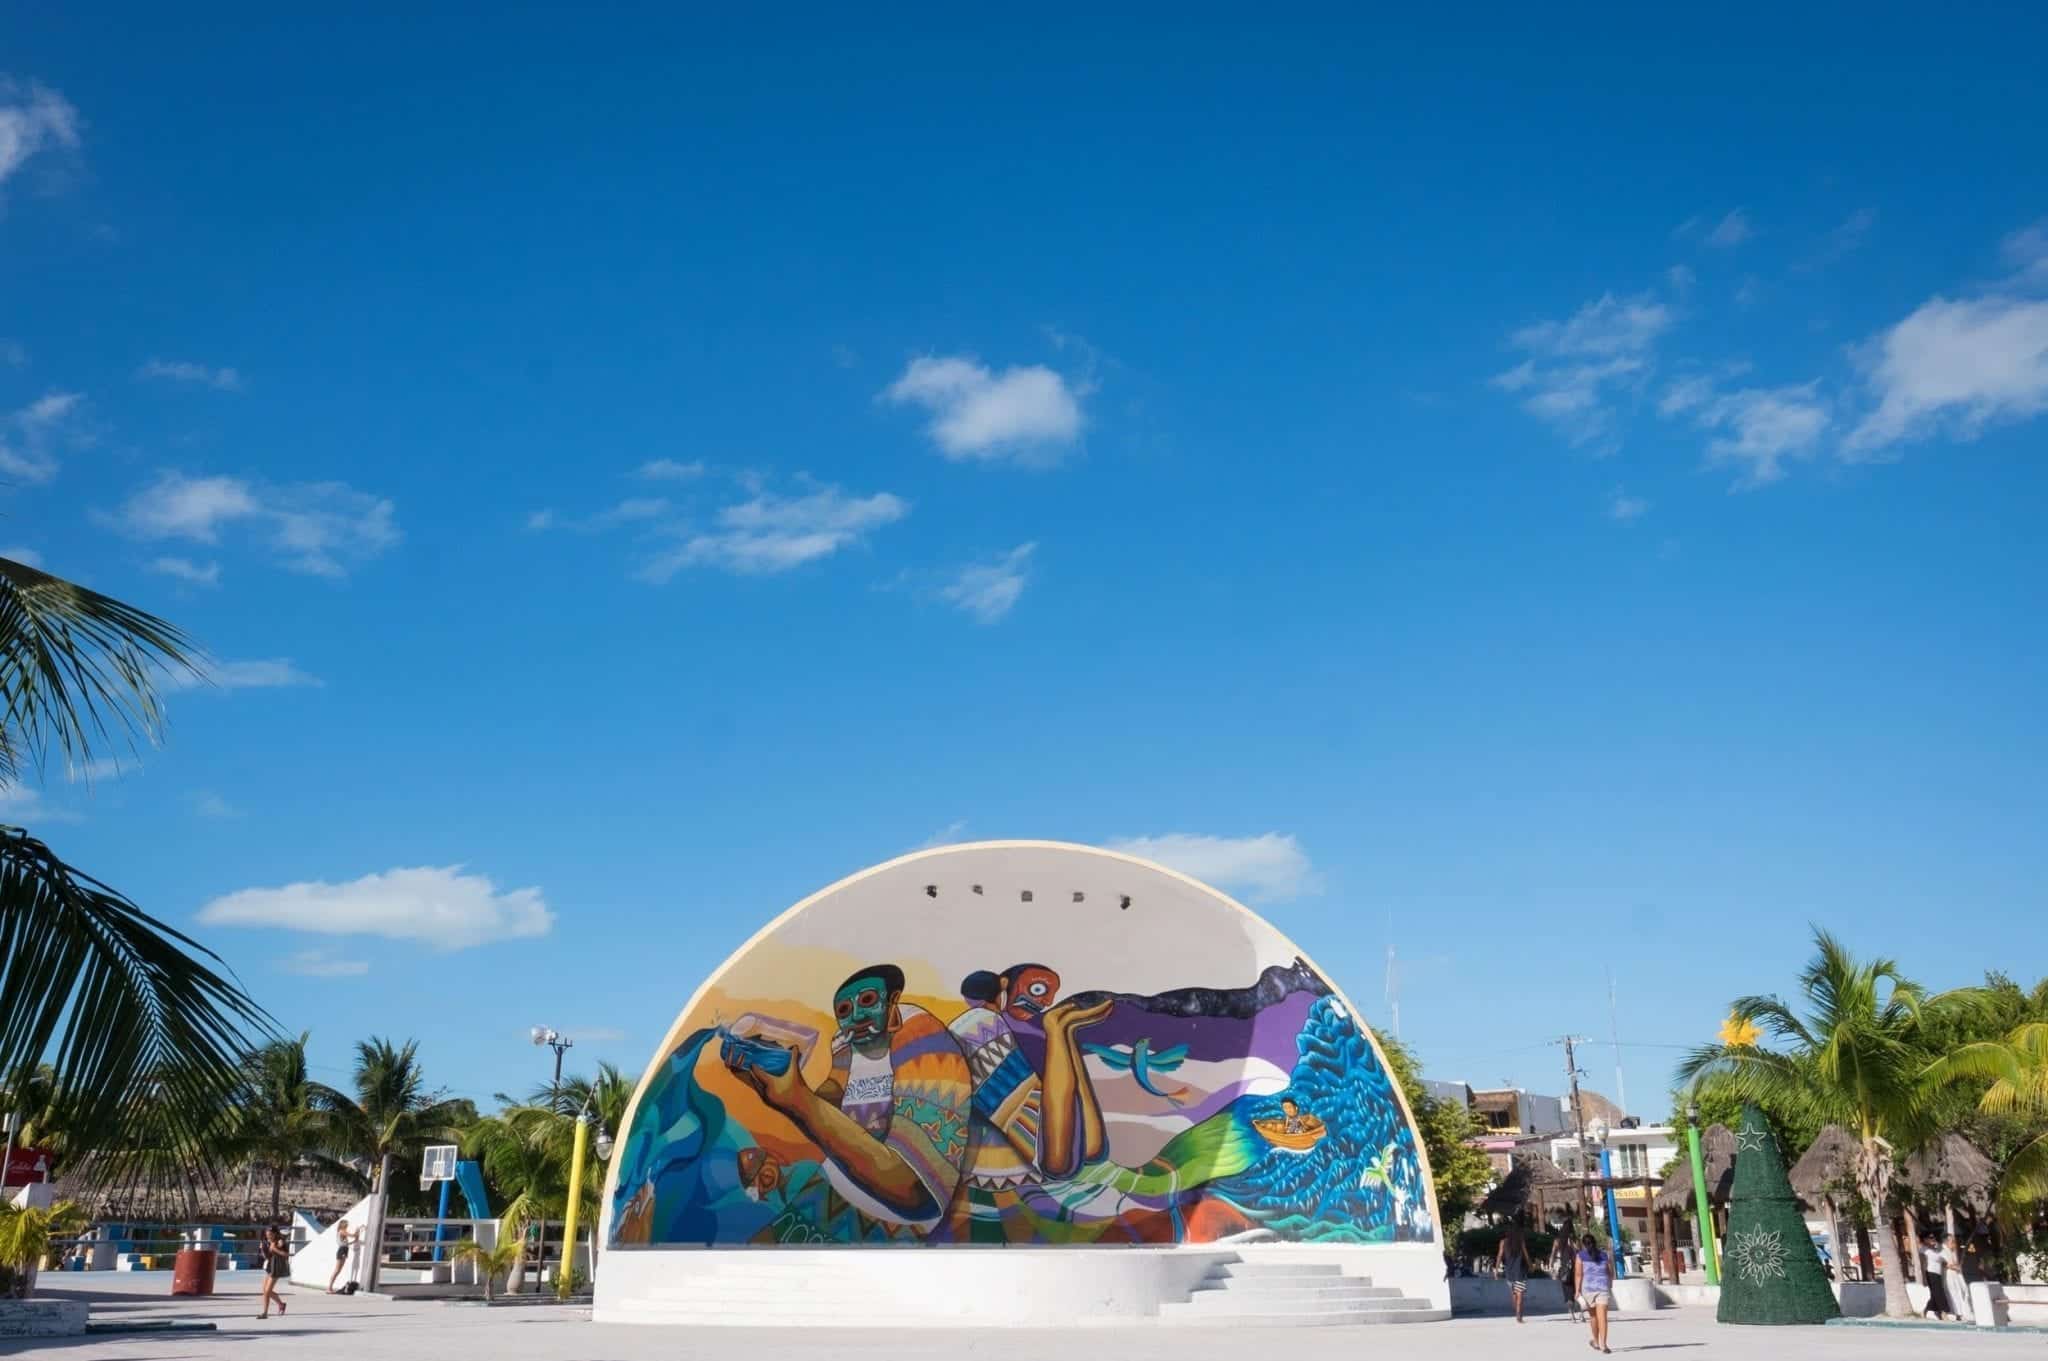 A brightly painted amphitheater on Holbox Island against a bright blue sky.